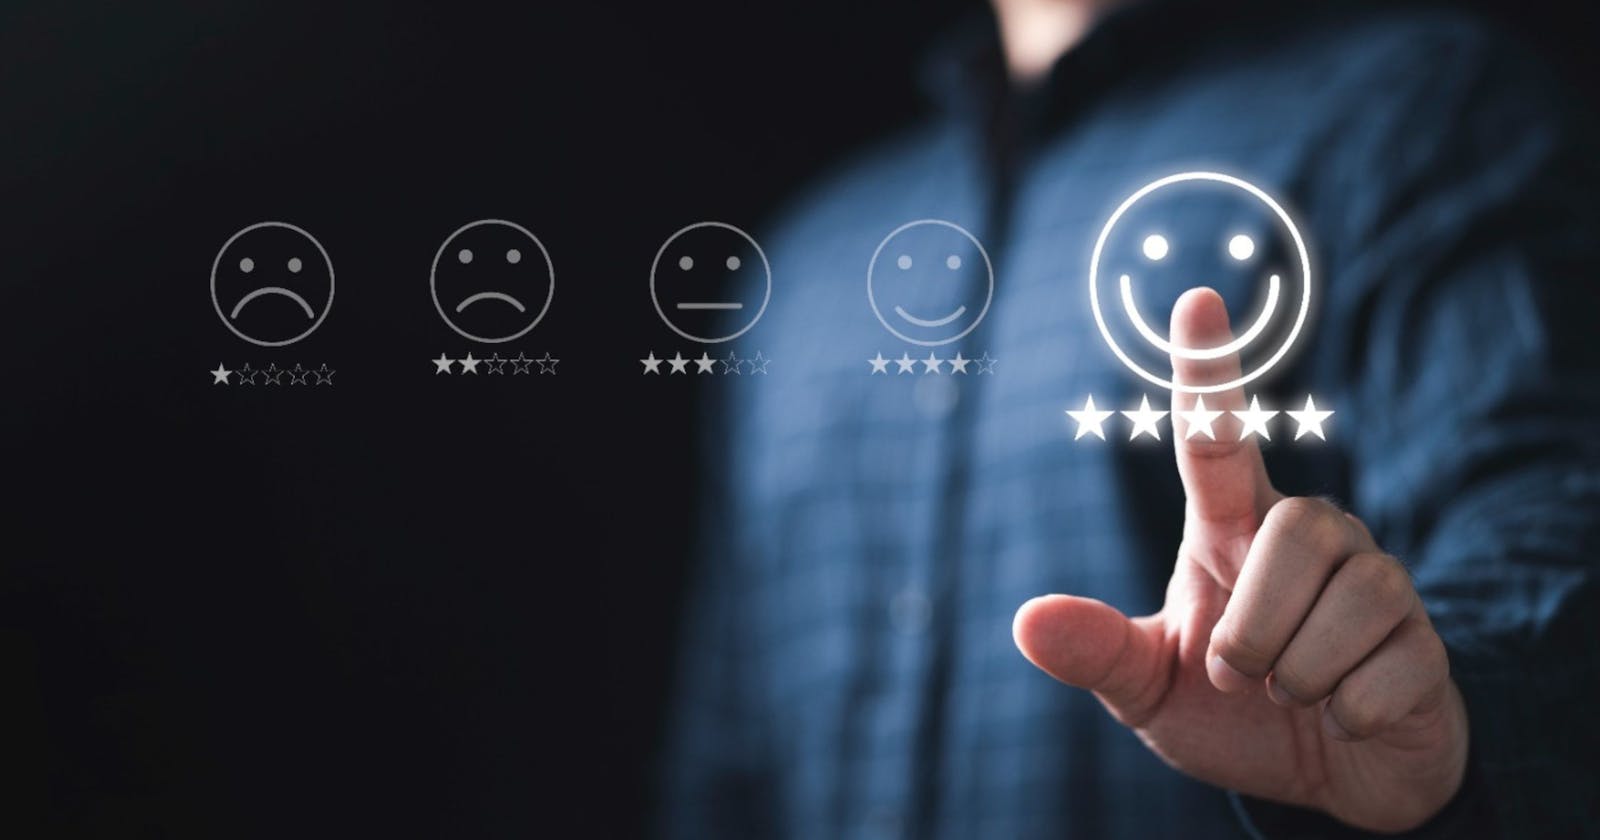 6 Reasons Why Customer Feedback Is Important To Your Business